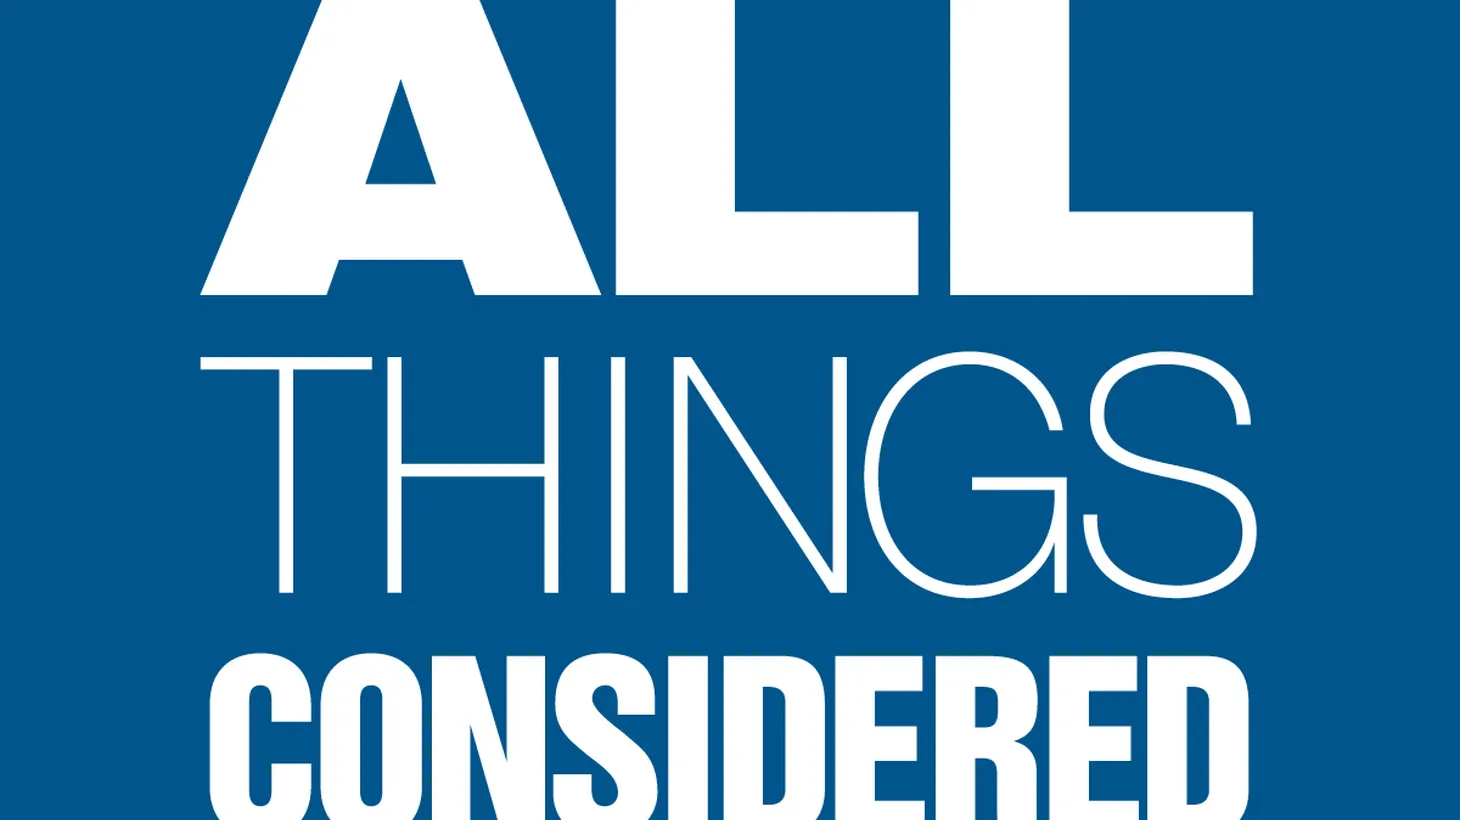 All Things Considered broadcast on Sep. 14th, 2017.